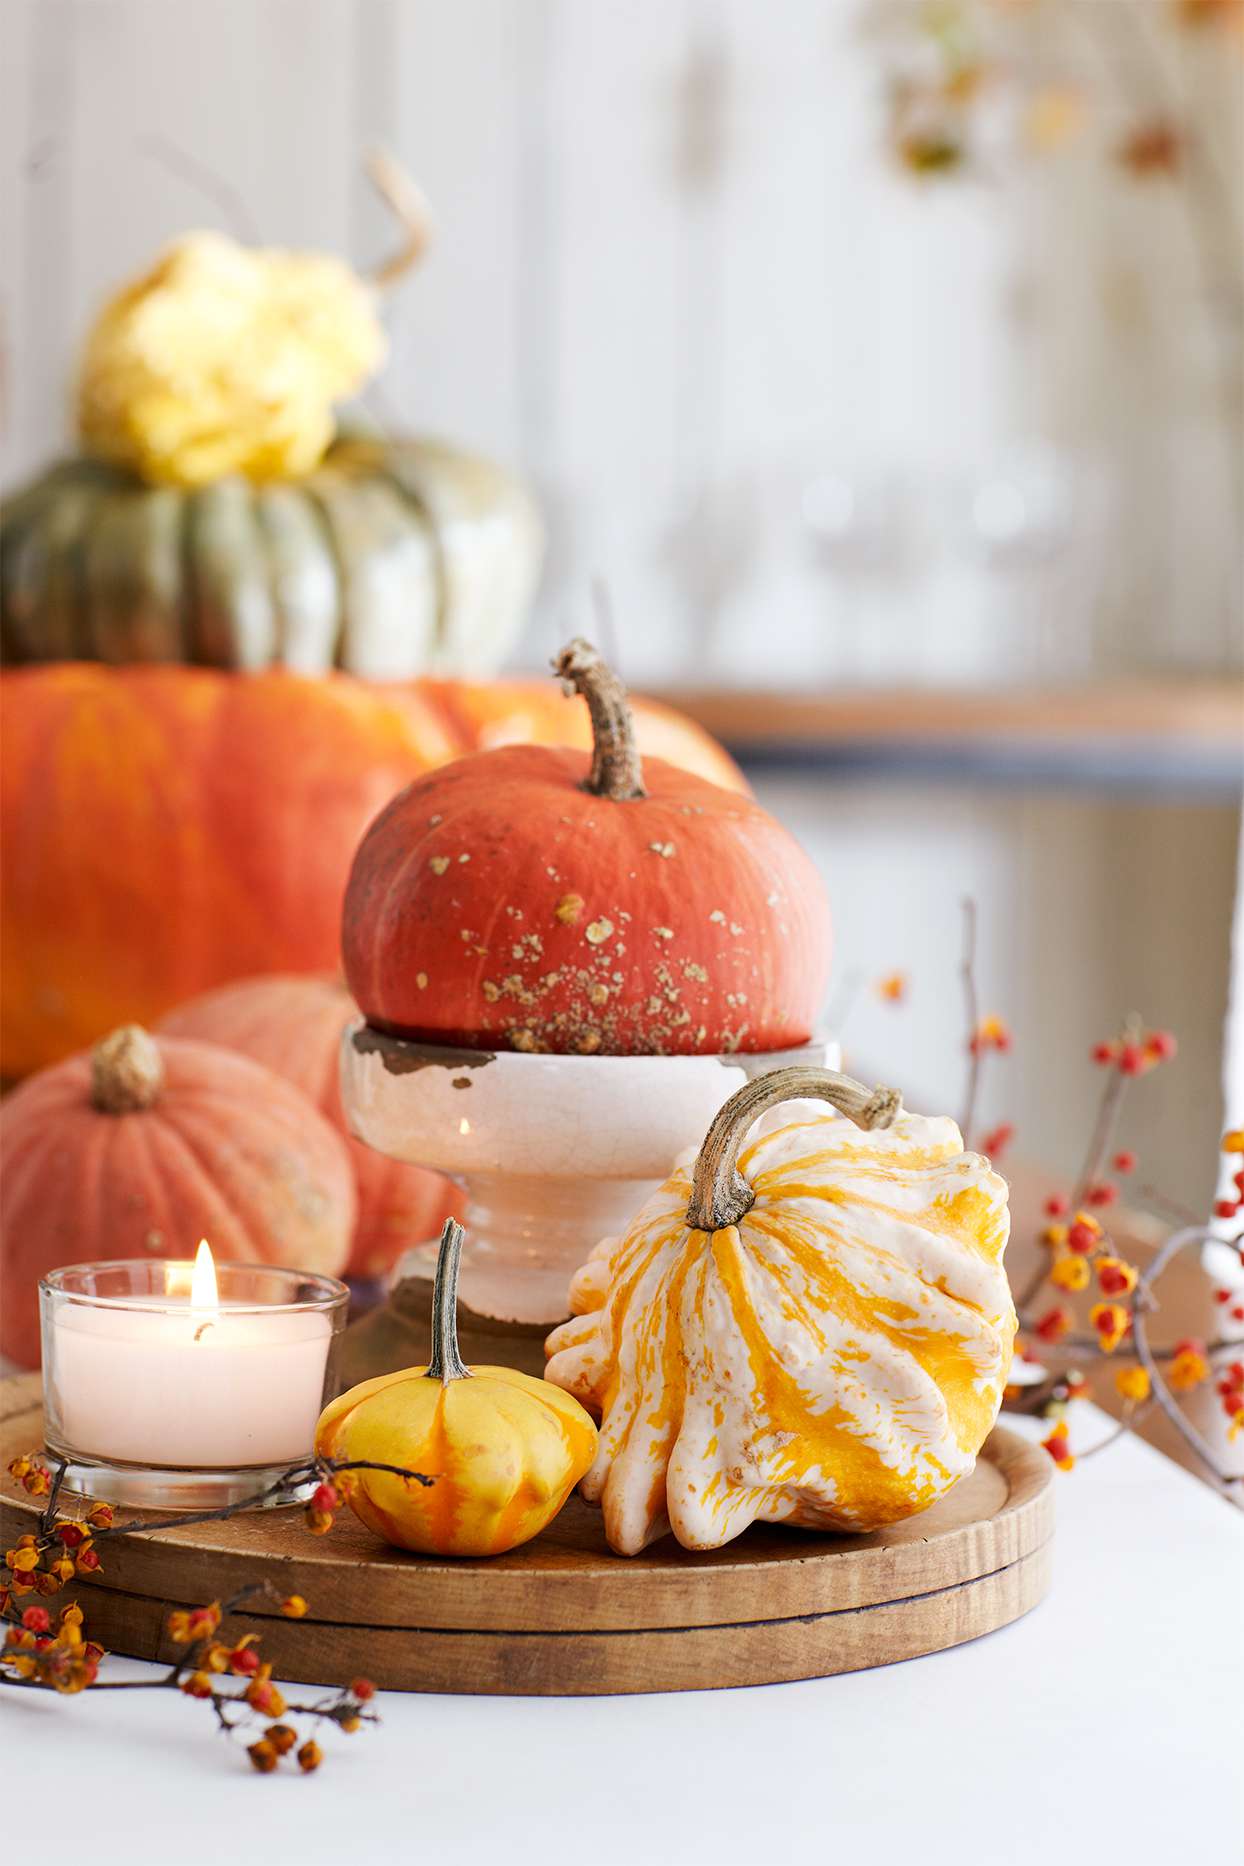 Give Your Home Fall Flair by Decorating with Pumpkins and Gourds ...